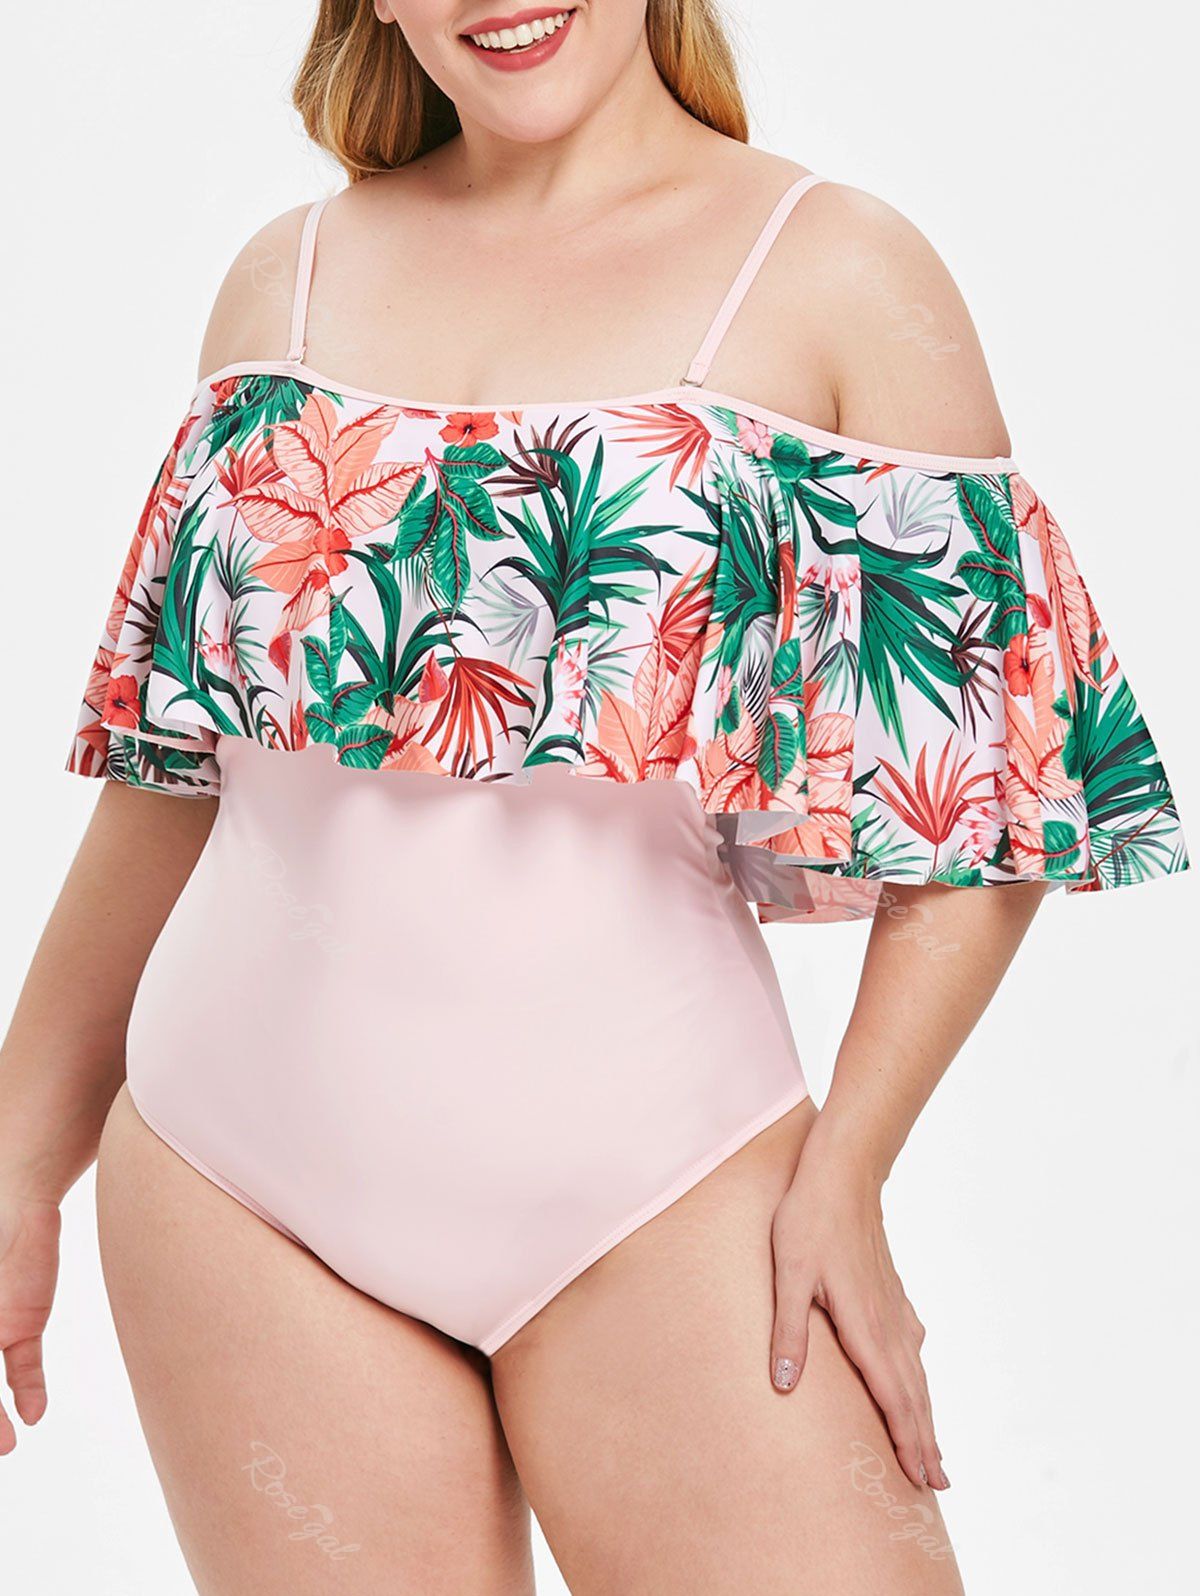 New Floral and Leaf Print Plus Size Padded Swimwear  